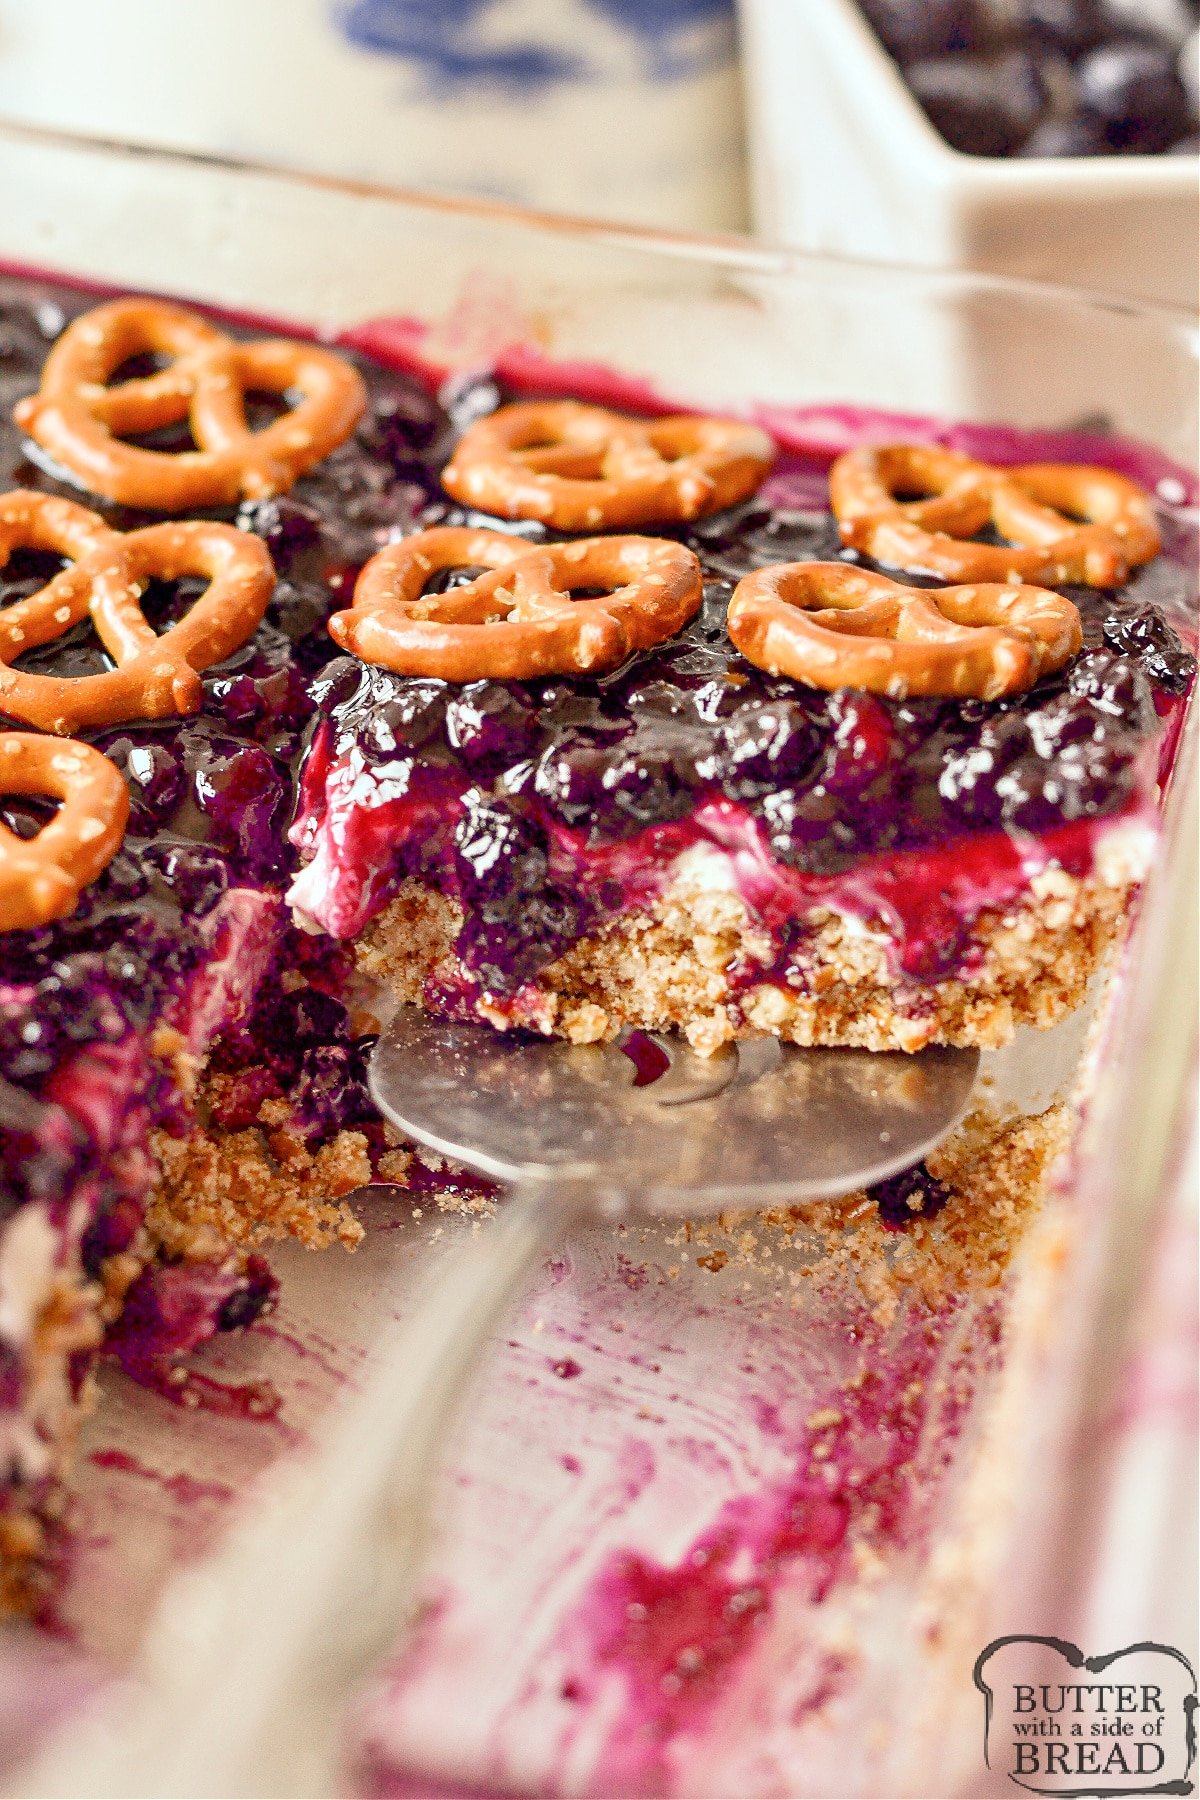 Blueberry Pretzel Salad is a delicious dessert that combines the salty crunch of pretzels with the sweet and tangy flavors of cream cheese and blueberries. This refreshing dessert is perfect for summer BBQs, birthday parties, and holiday dinner parties.